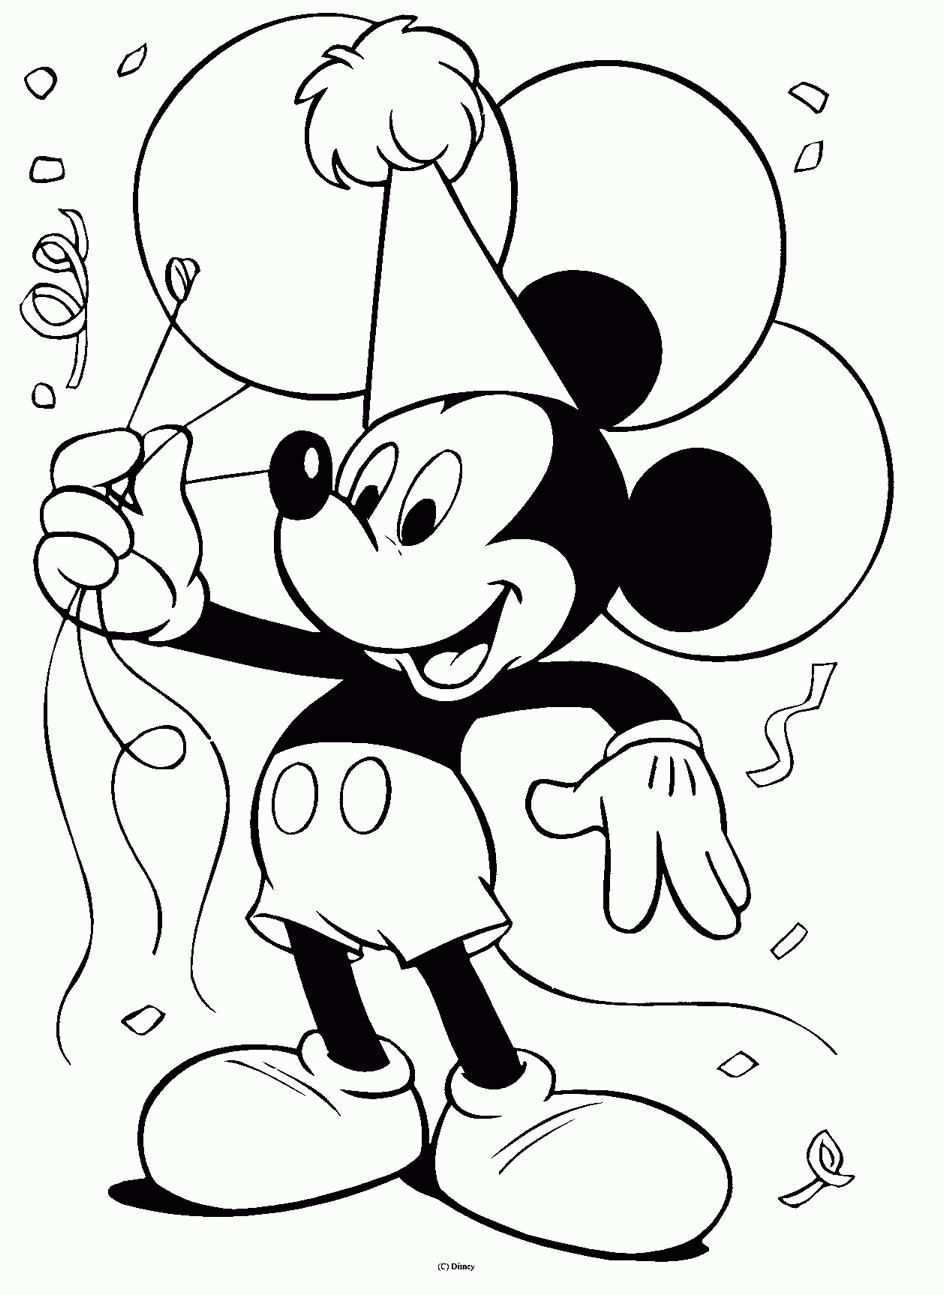 Mickey Mouse Coloring Sheet Disney Birthday Birthdays Party Parties Mickey Mouse Colo